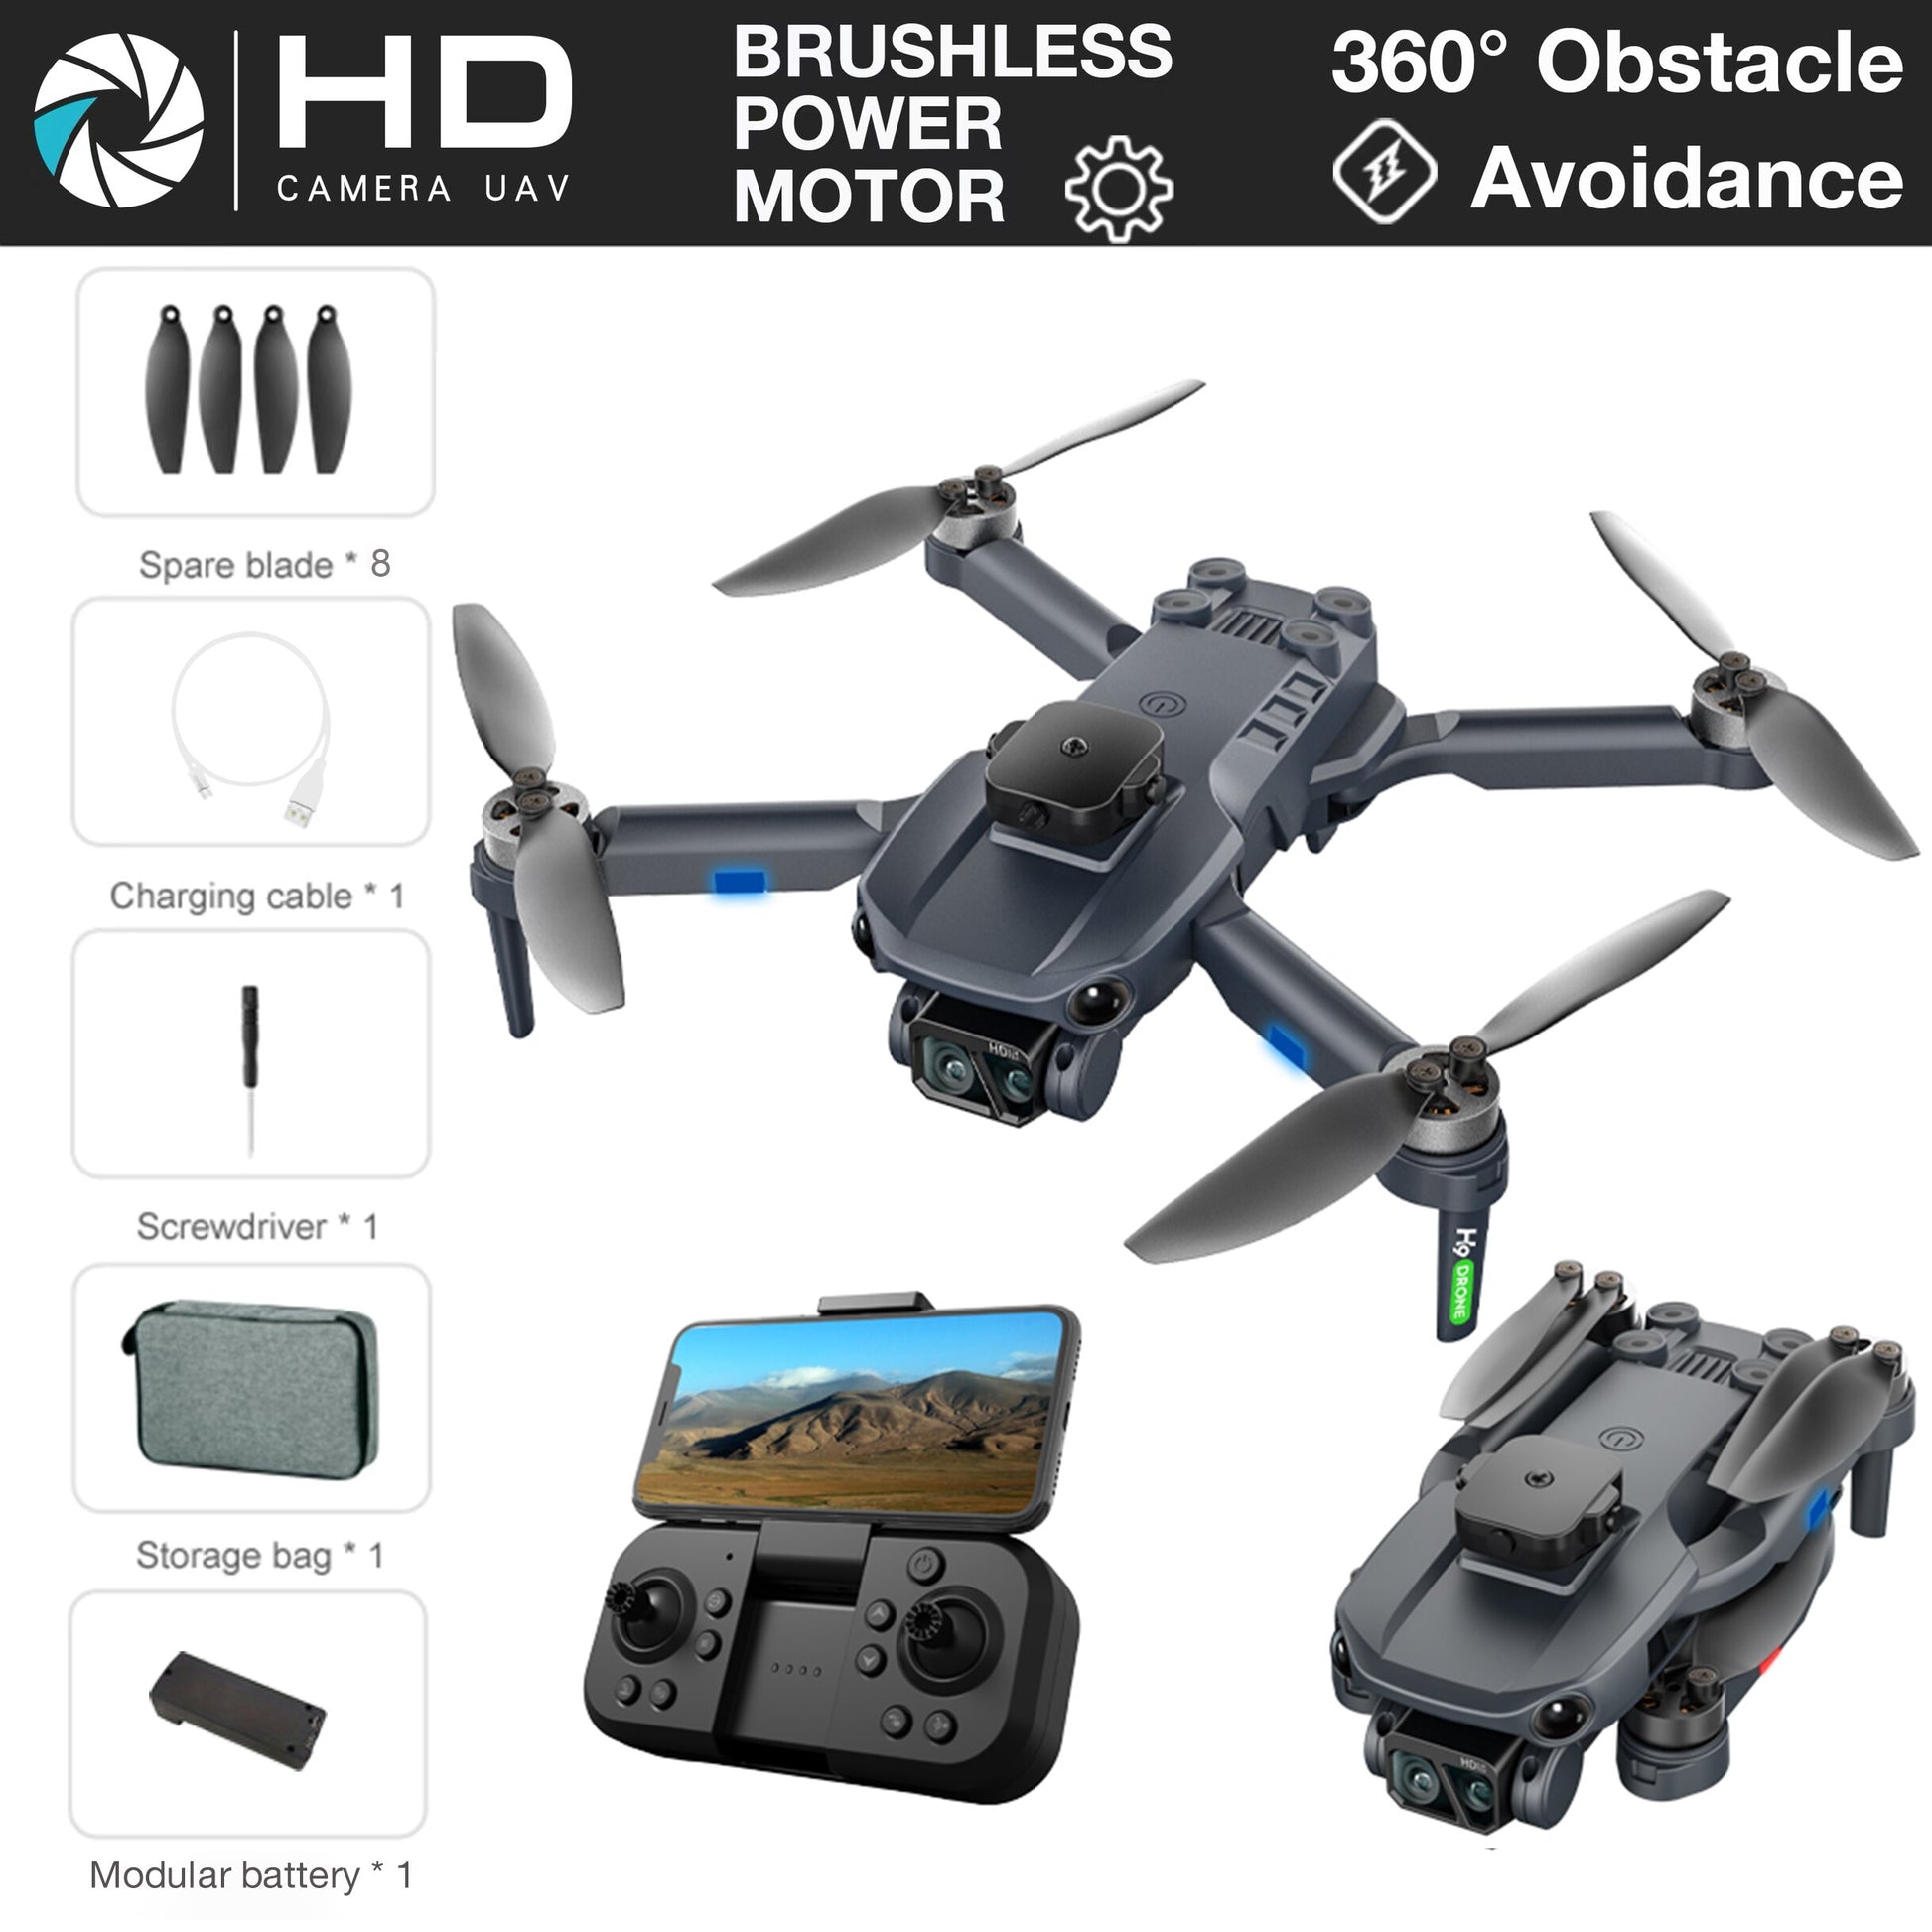 H9 Drone, BRUSHLESS 3600 Obstacle HD POWER CAMERA UA V